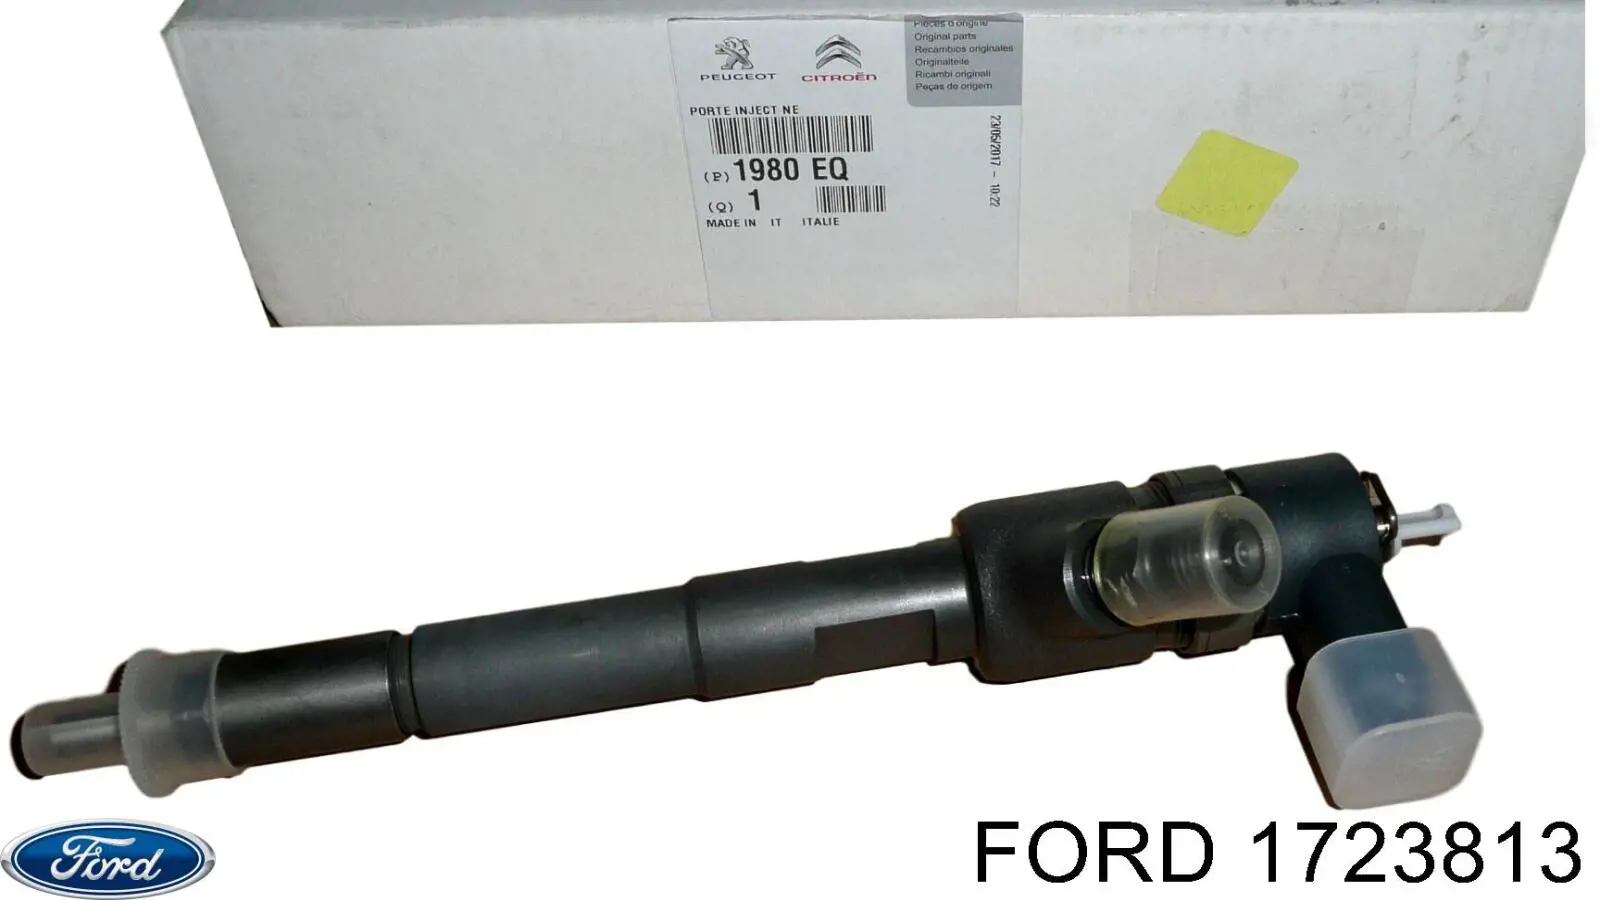 1723813 Ford inyector